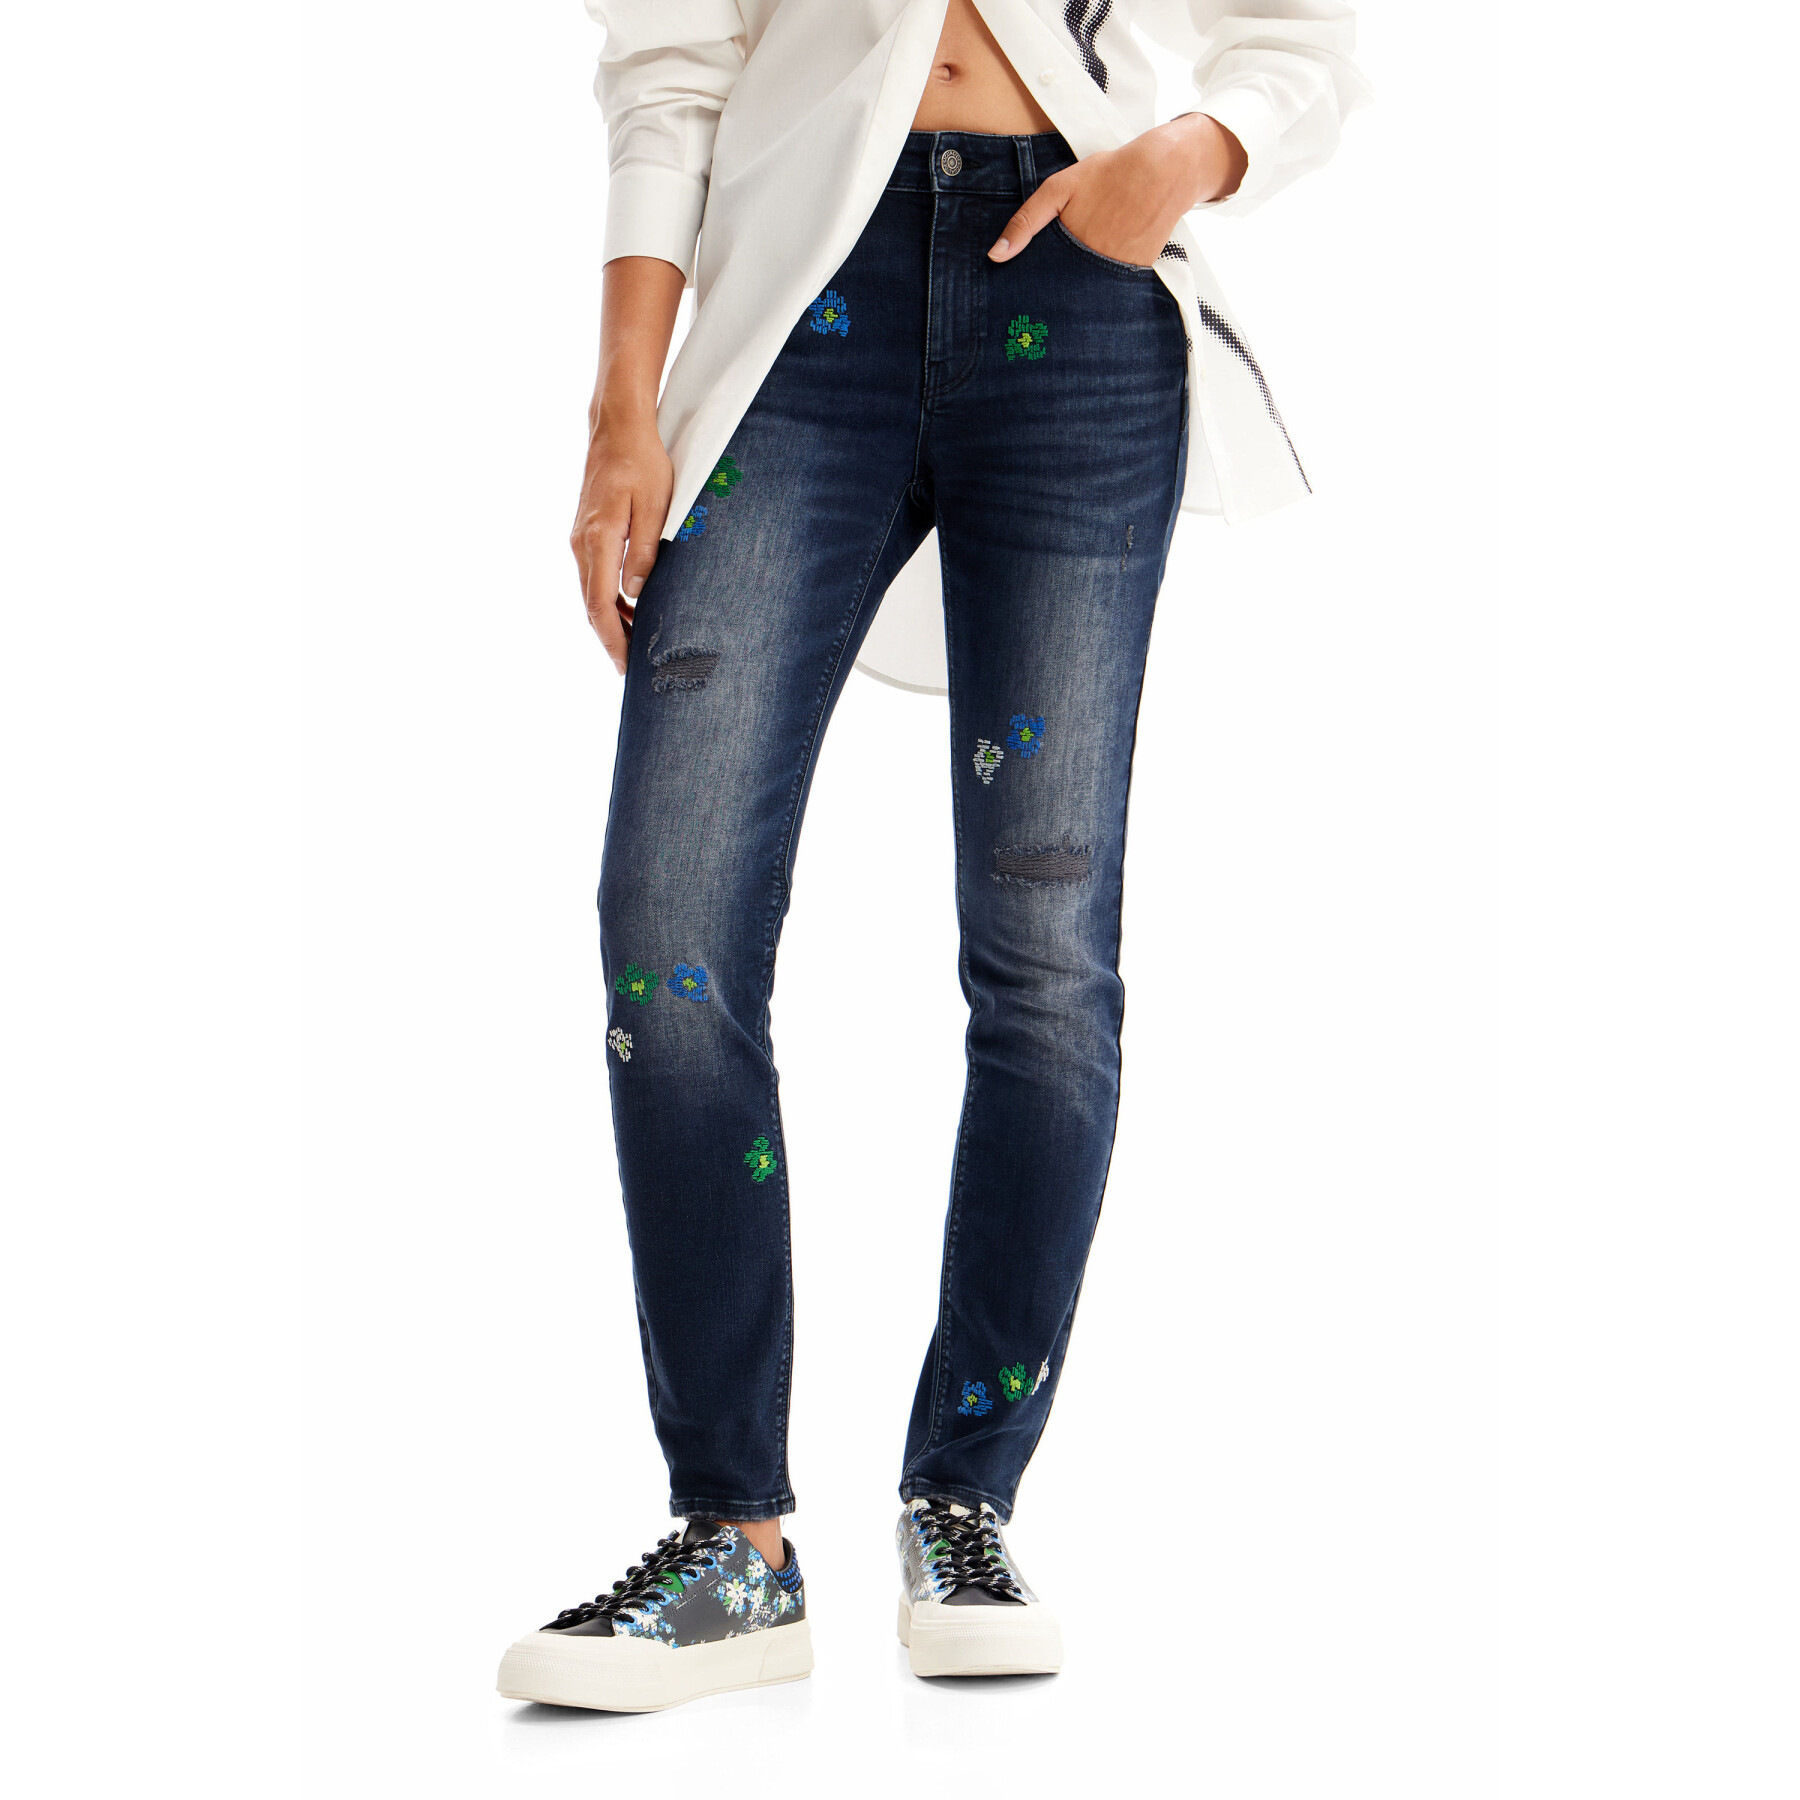 Women's embroidered skinny jeans Desigual Push-up